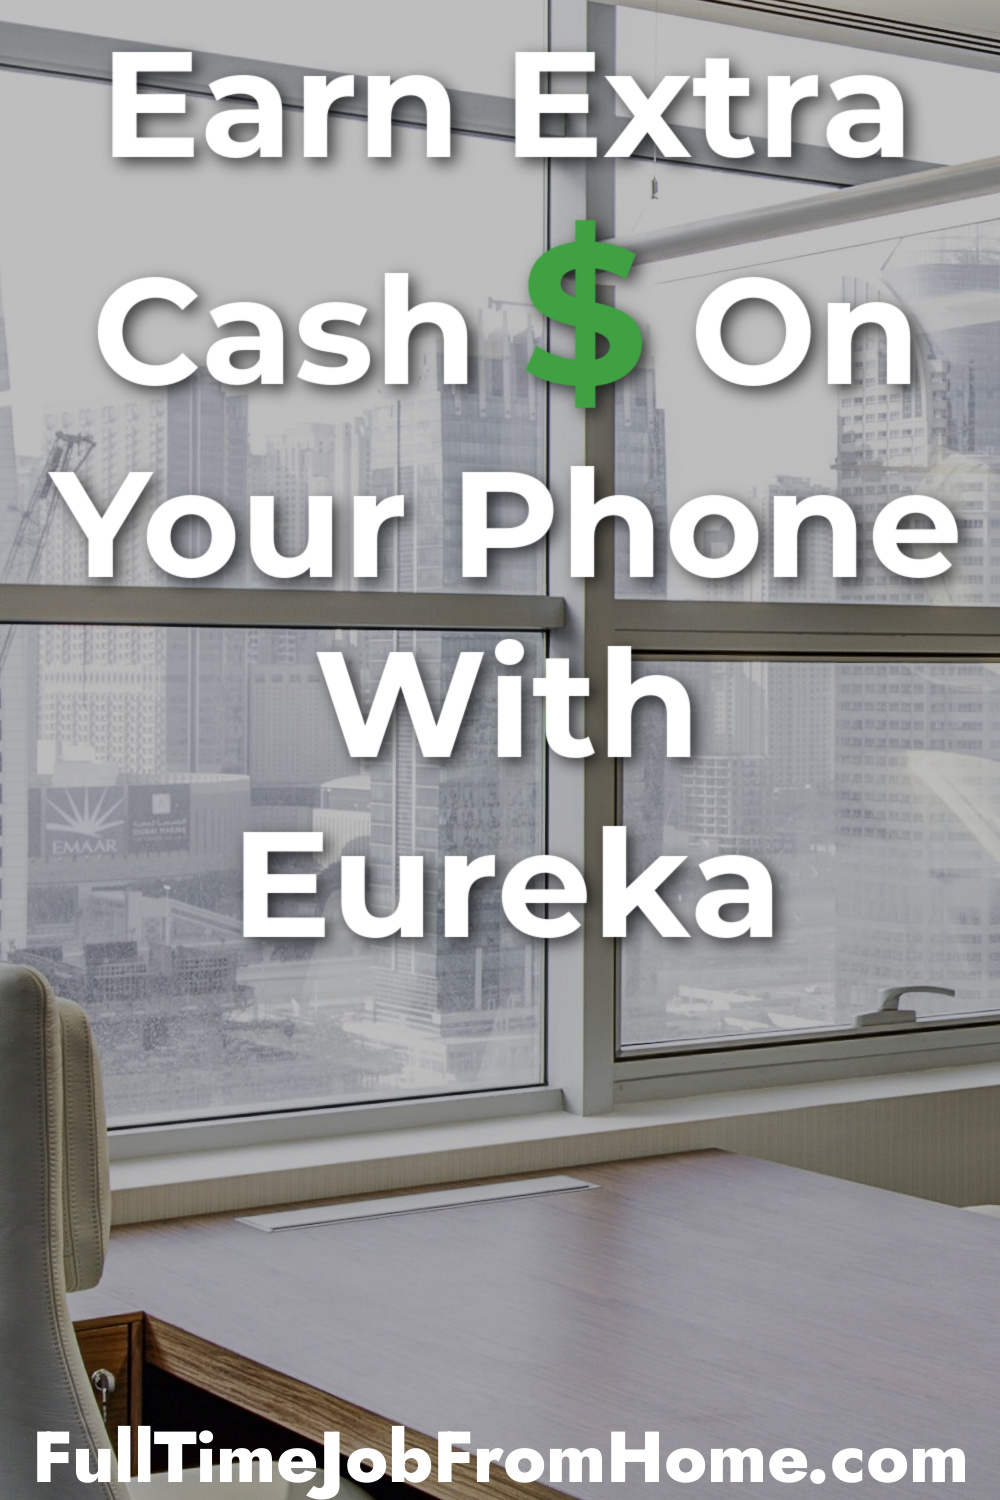 Can you really make money with Eureka App. Just another survey scam? 